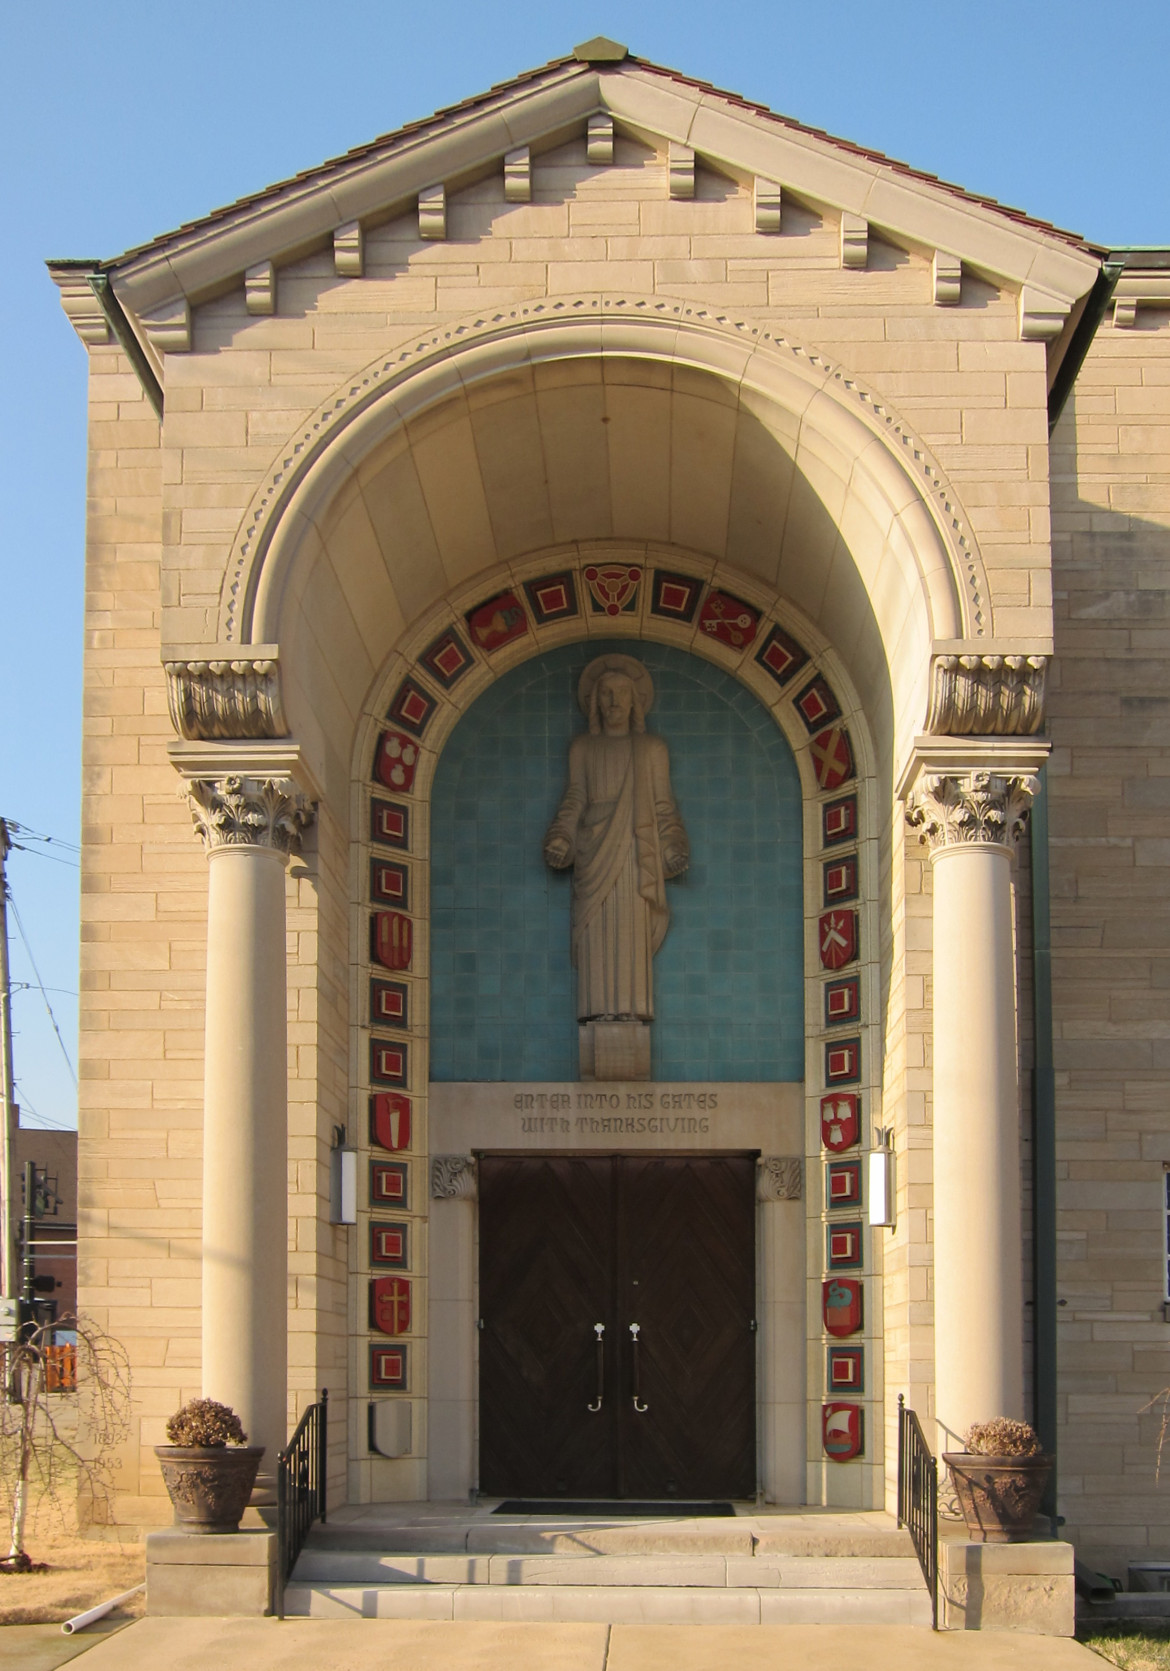 The main entry surrounded by Christian symbols.  According to Esley Hamilton, the St. Louis County historian, it is unusual for a Protestant church to display as much symbolism as Concordia does.  